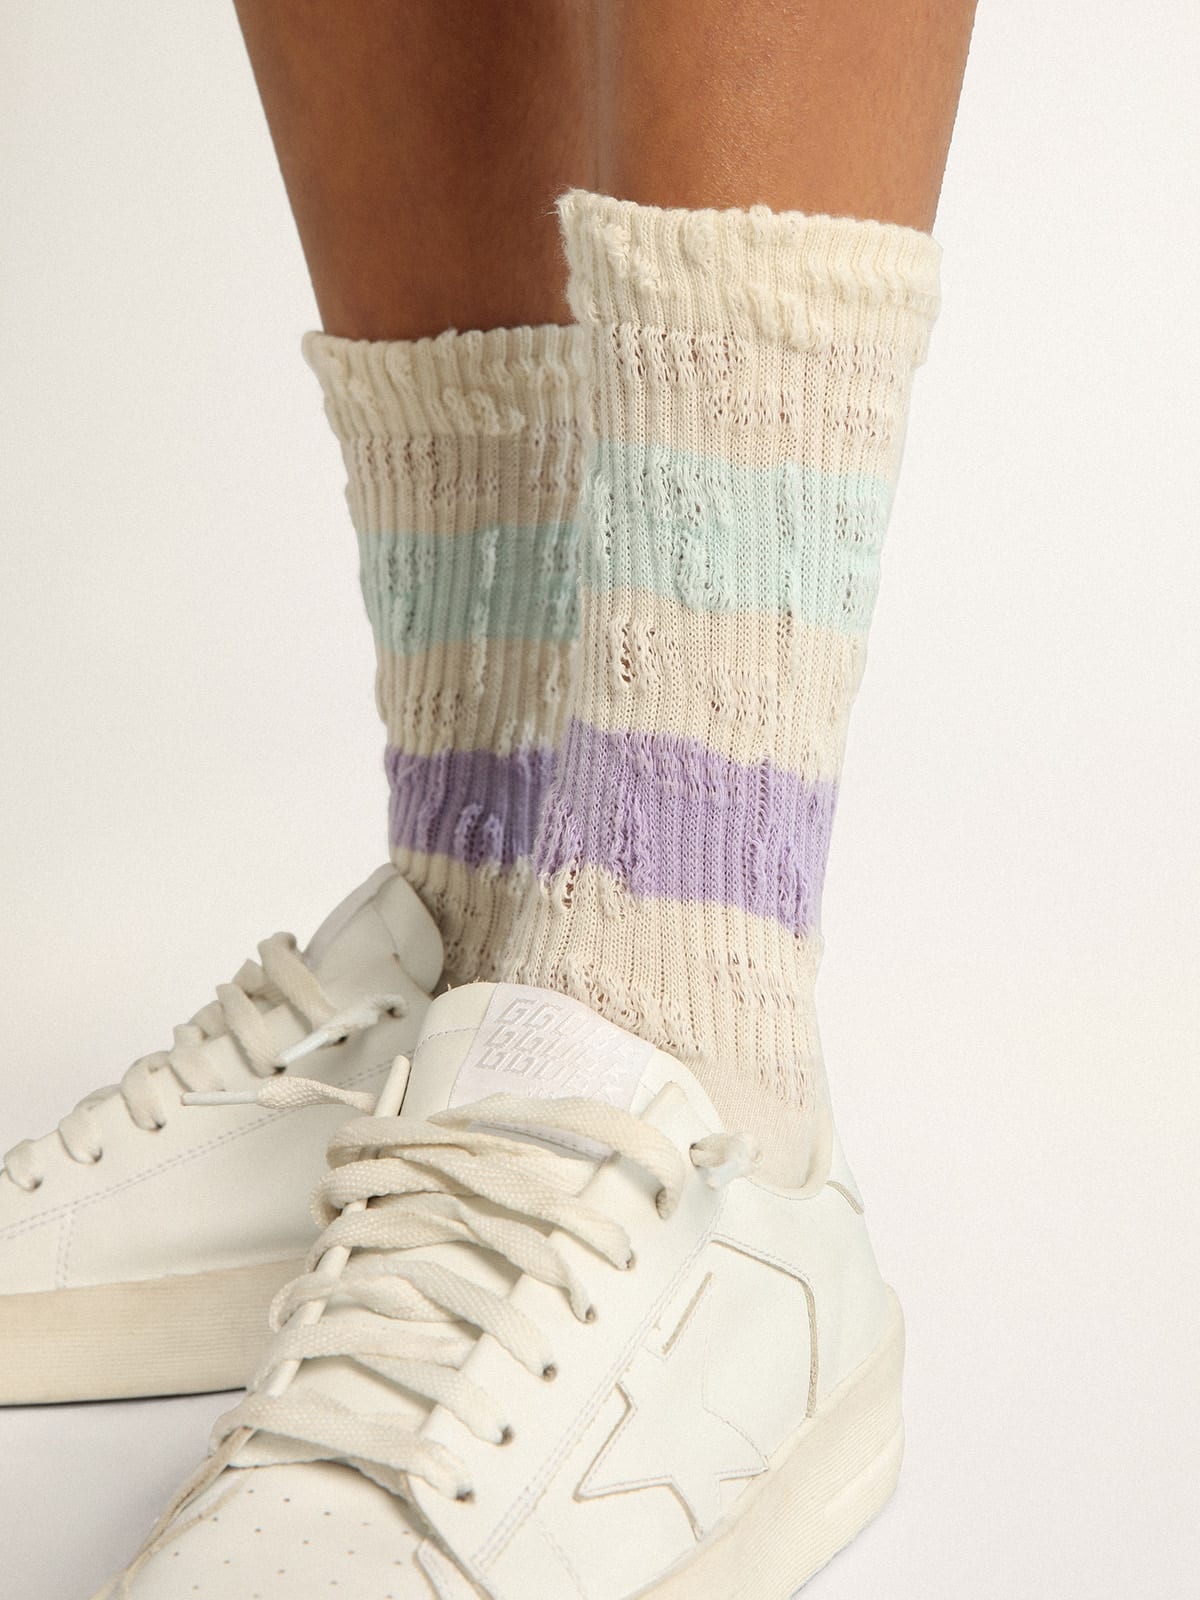 Distressed-finish white socks with lilac and baby blue stripes - 3